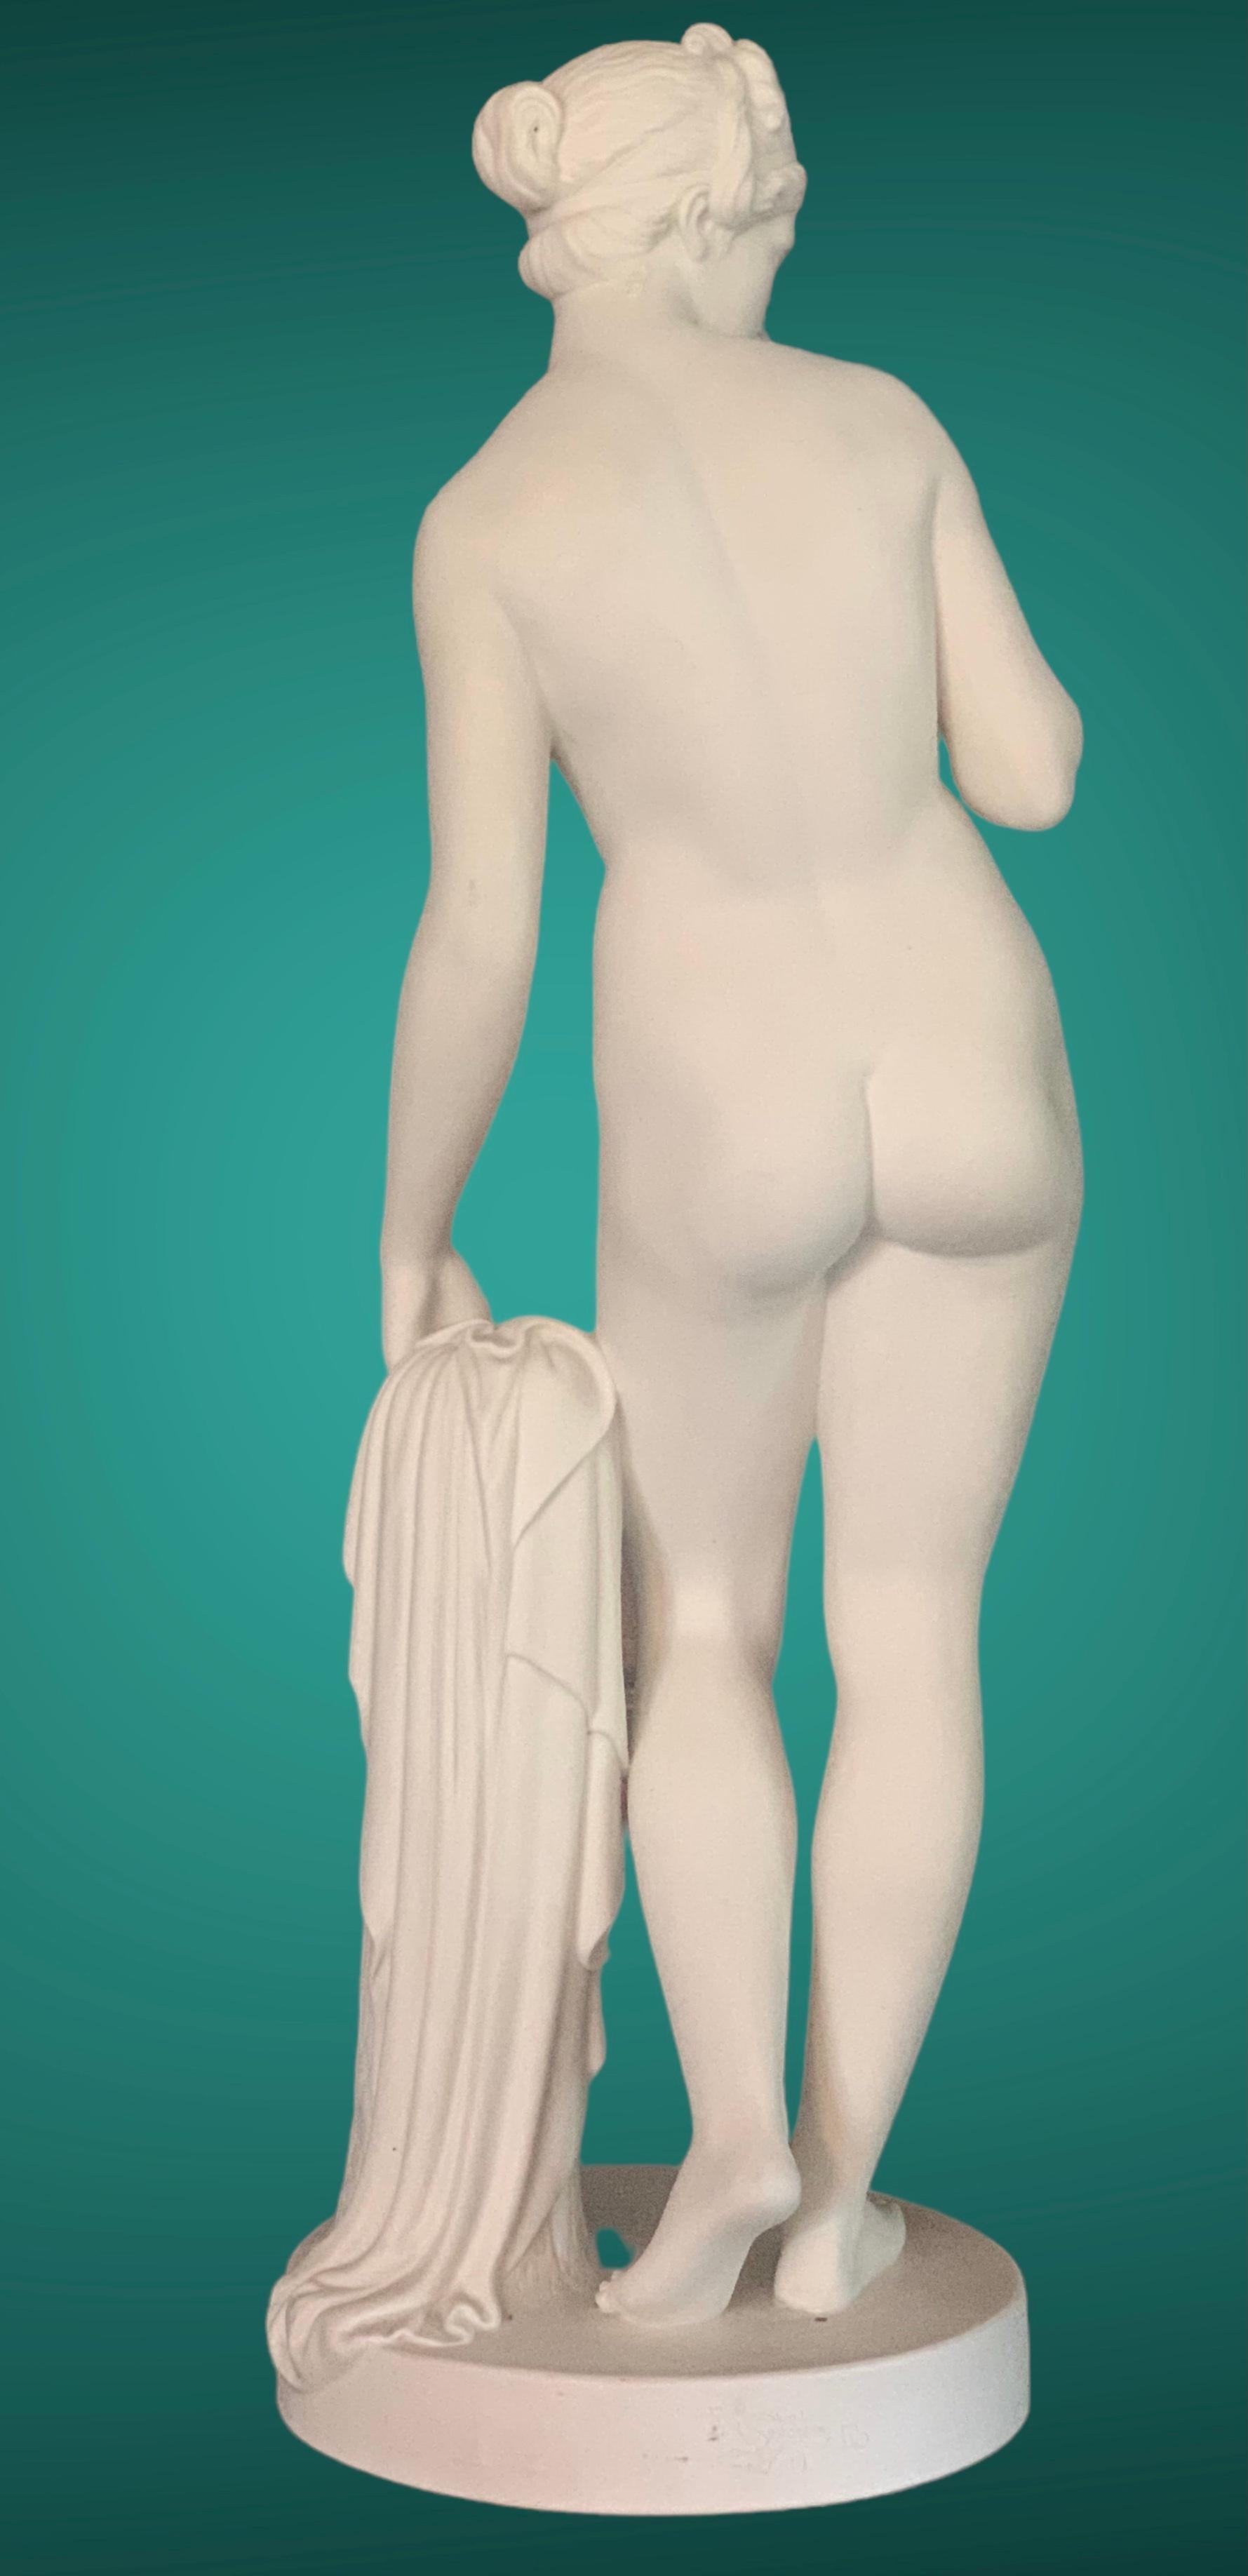 « Venus with Apple » bisque figure after Thorvaldsen 
A large figure in bisque /parian after original marble statue carved in Rom by Berle Thorvaldsen in 1813-16, commissioned by Countess Vorontsova. The Original statue now in Le Louvre Paris.